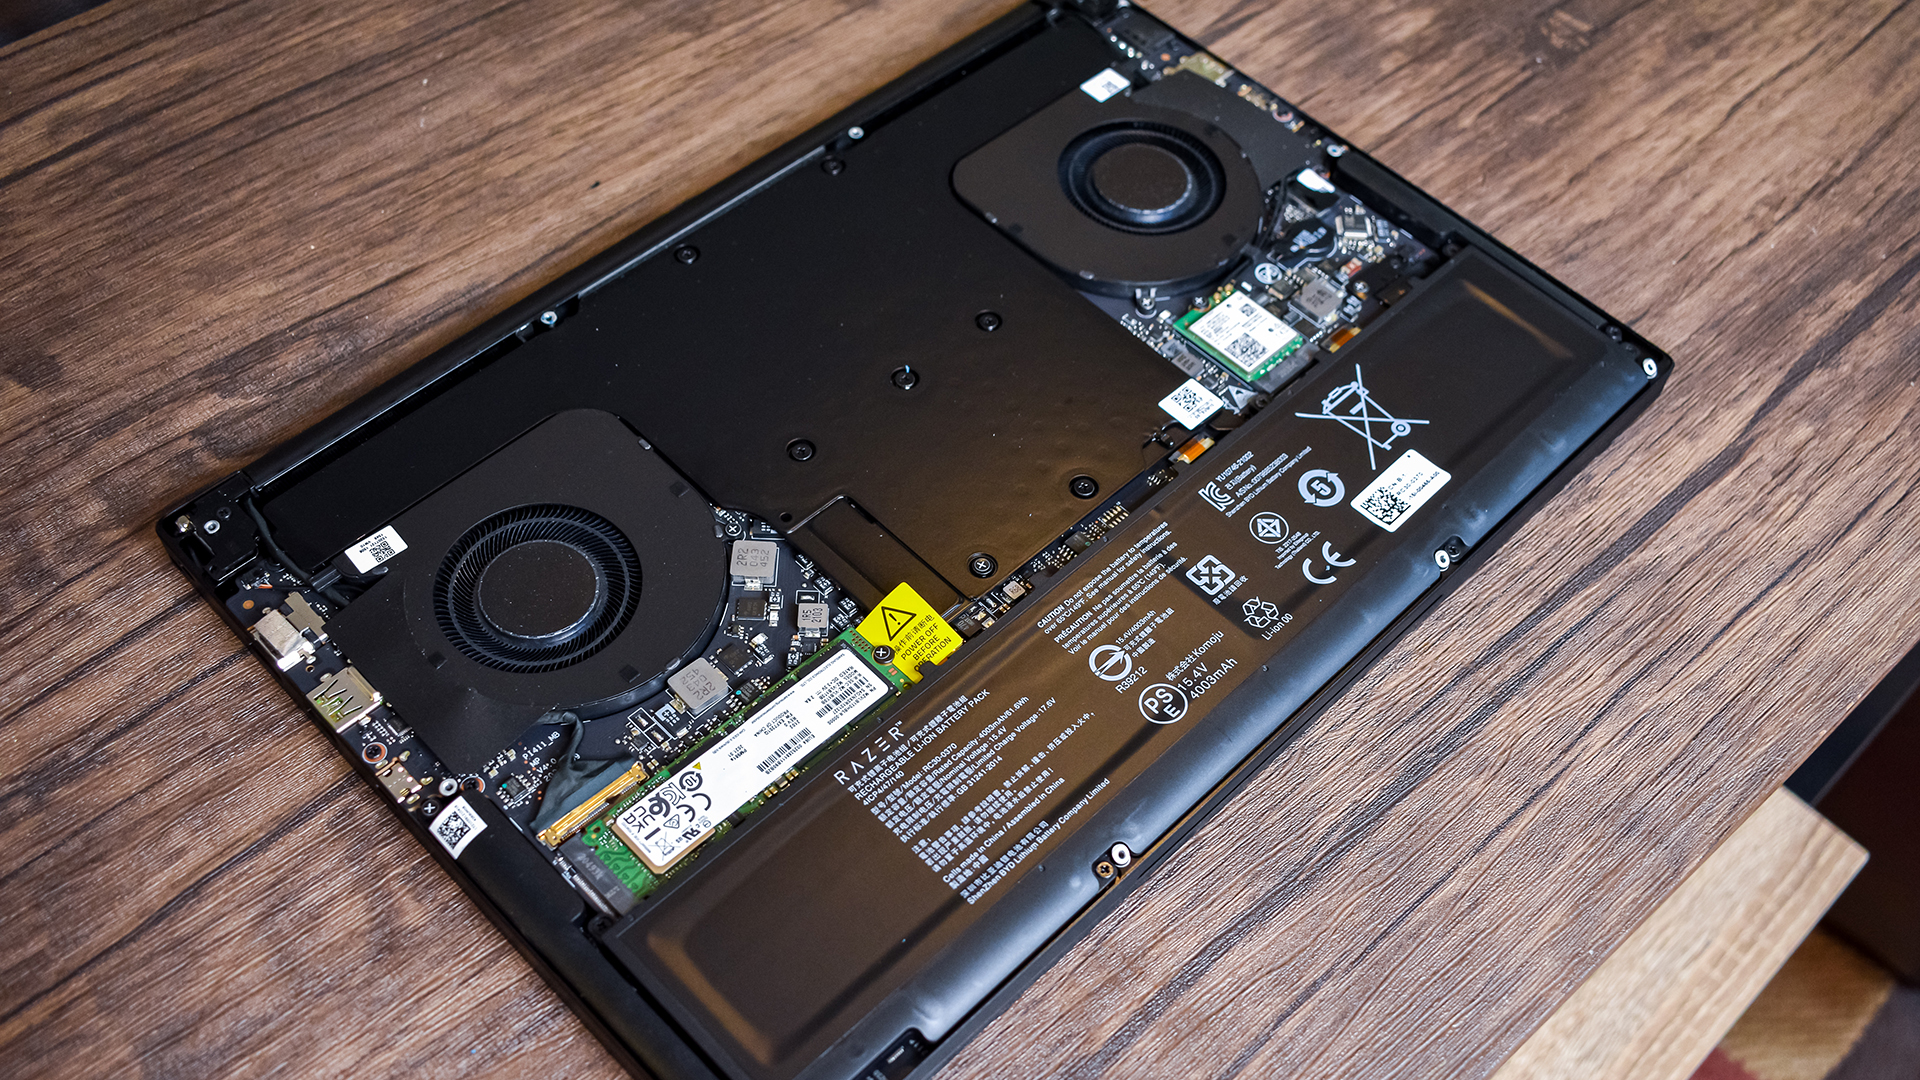 Razer Blade 14 inside, showing SSD, Wifi card and cooling solution.